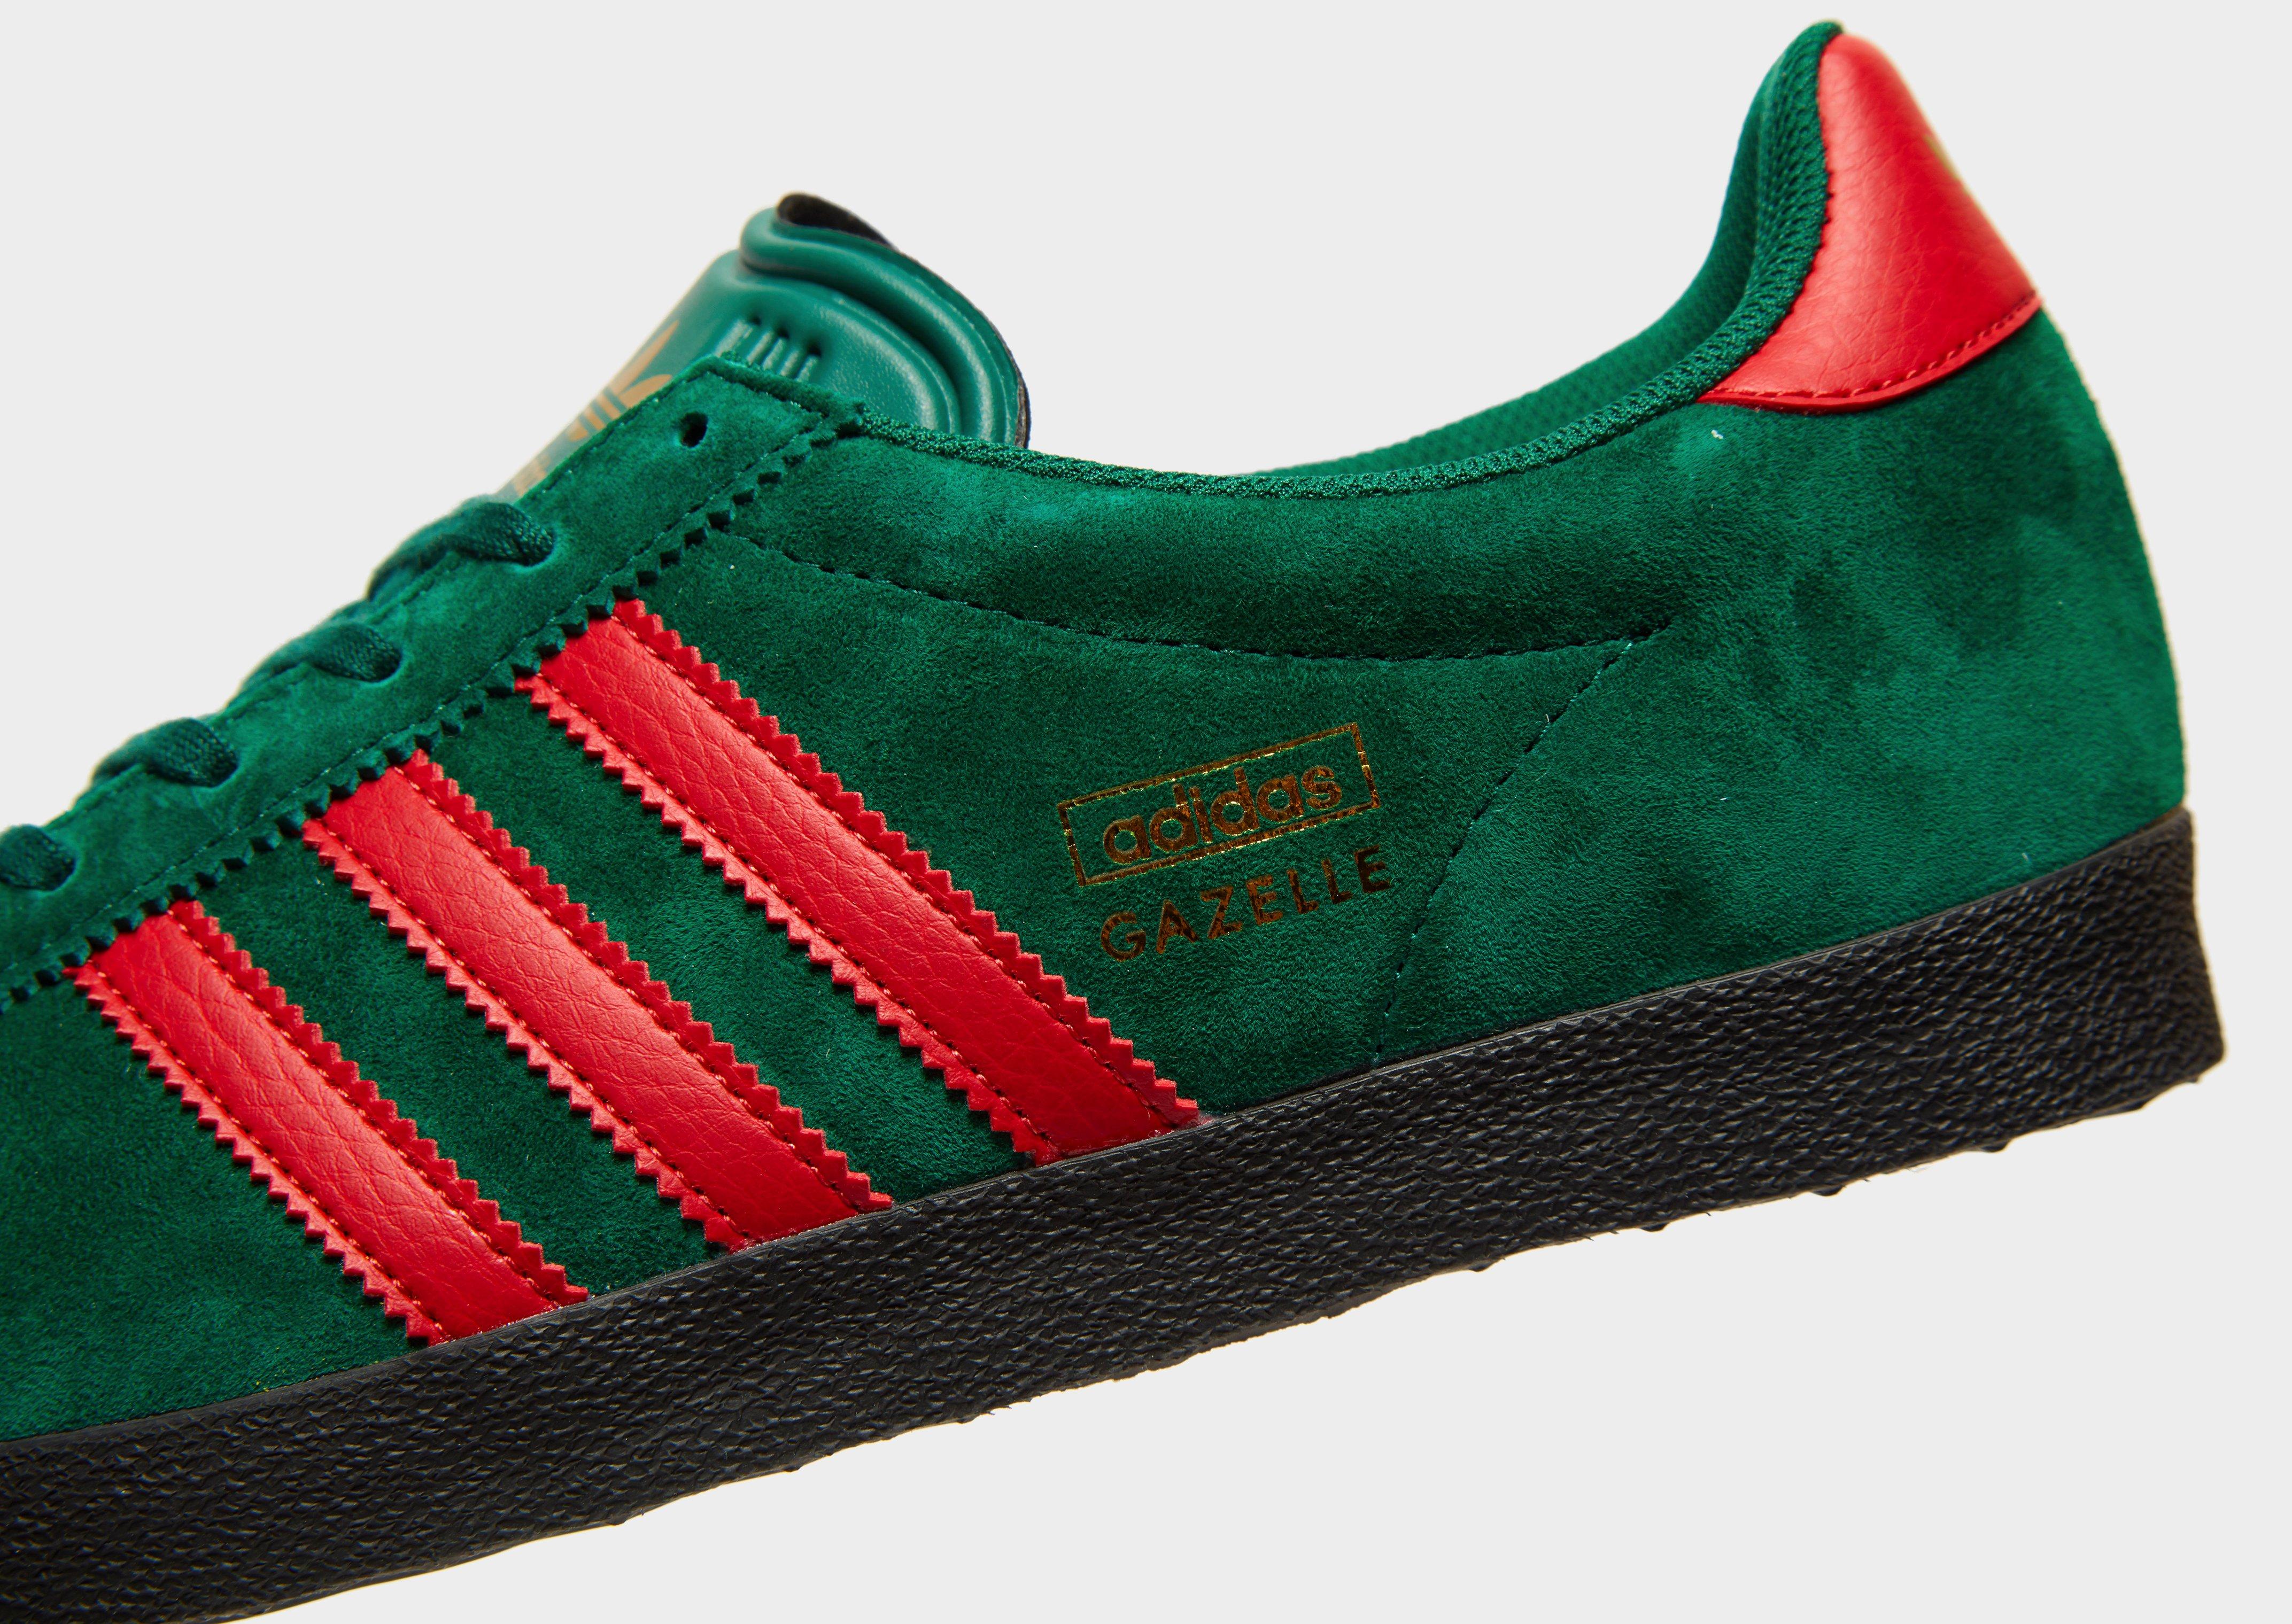 green and red adidas